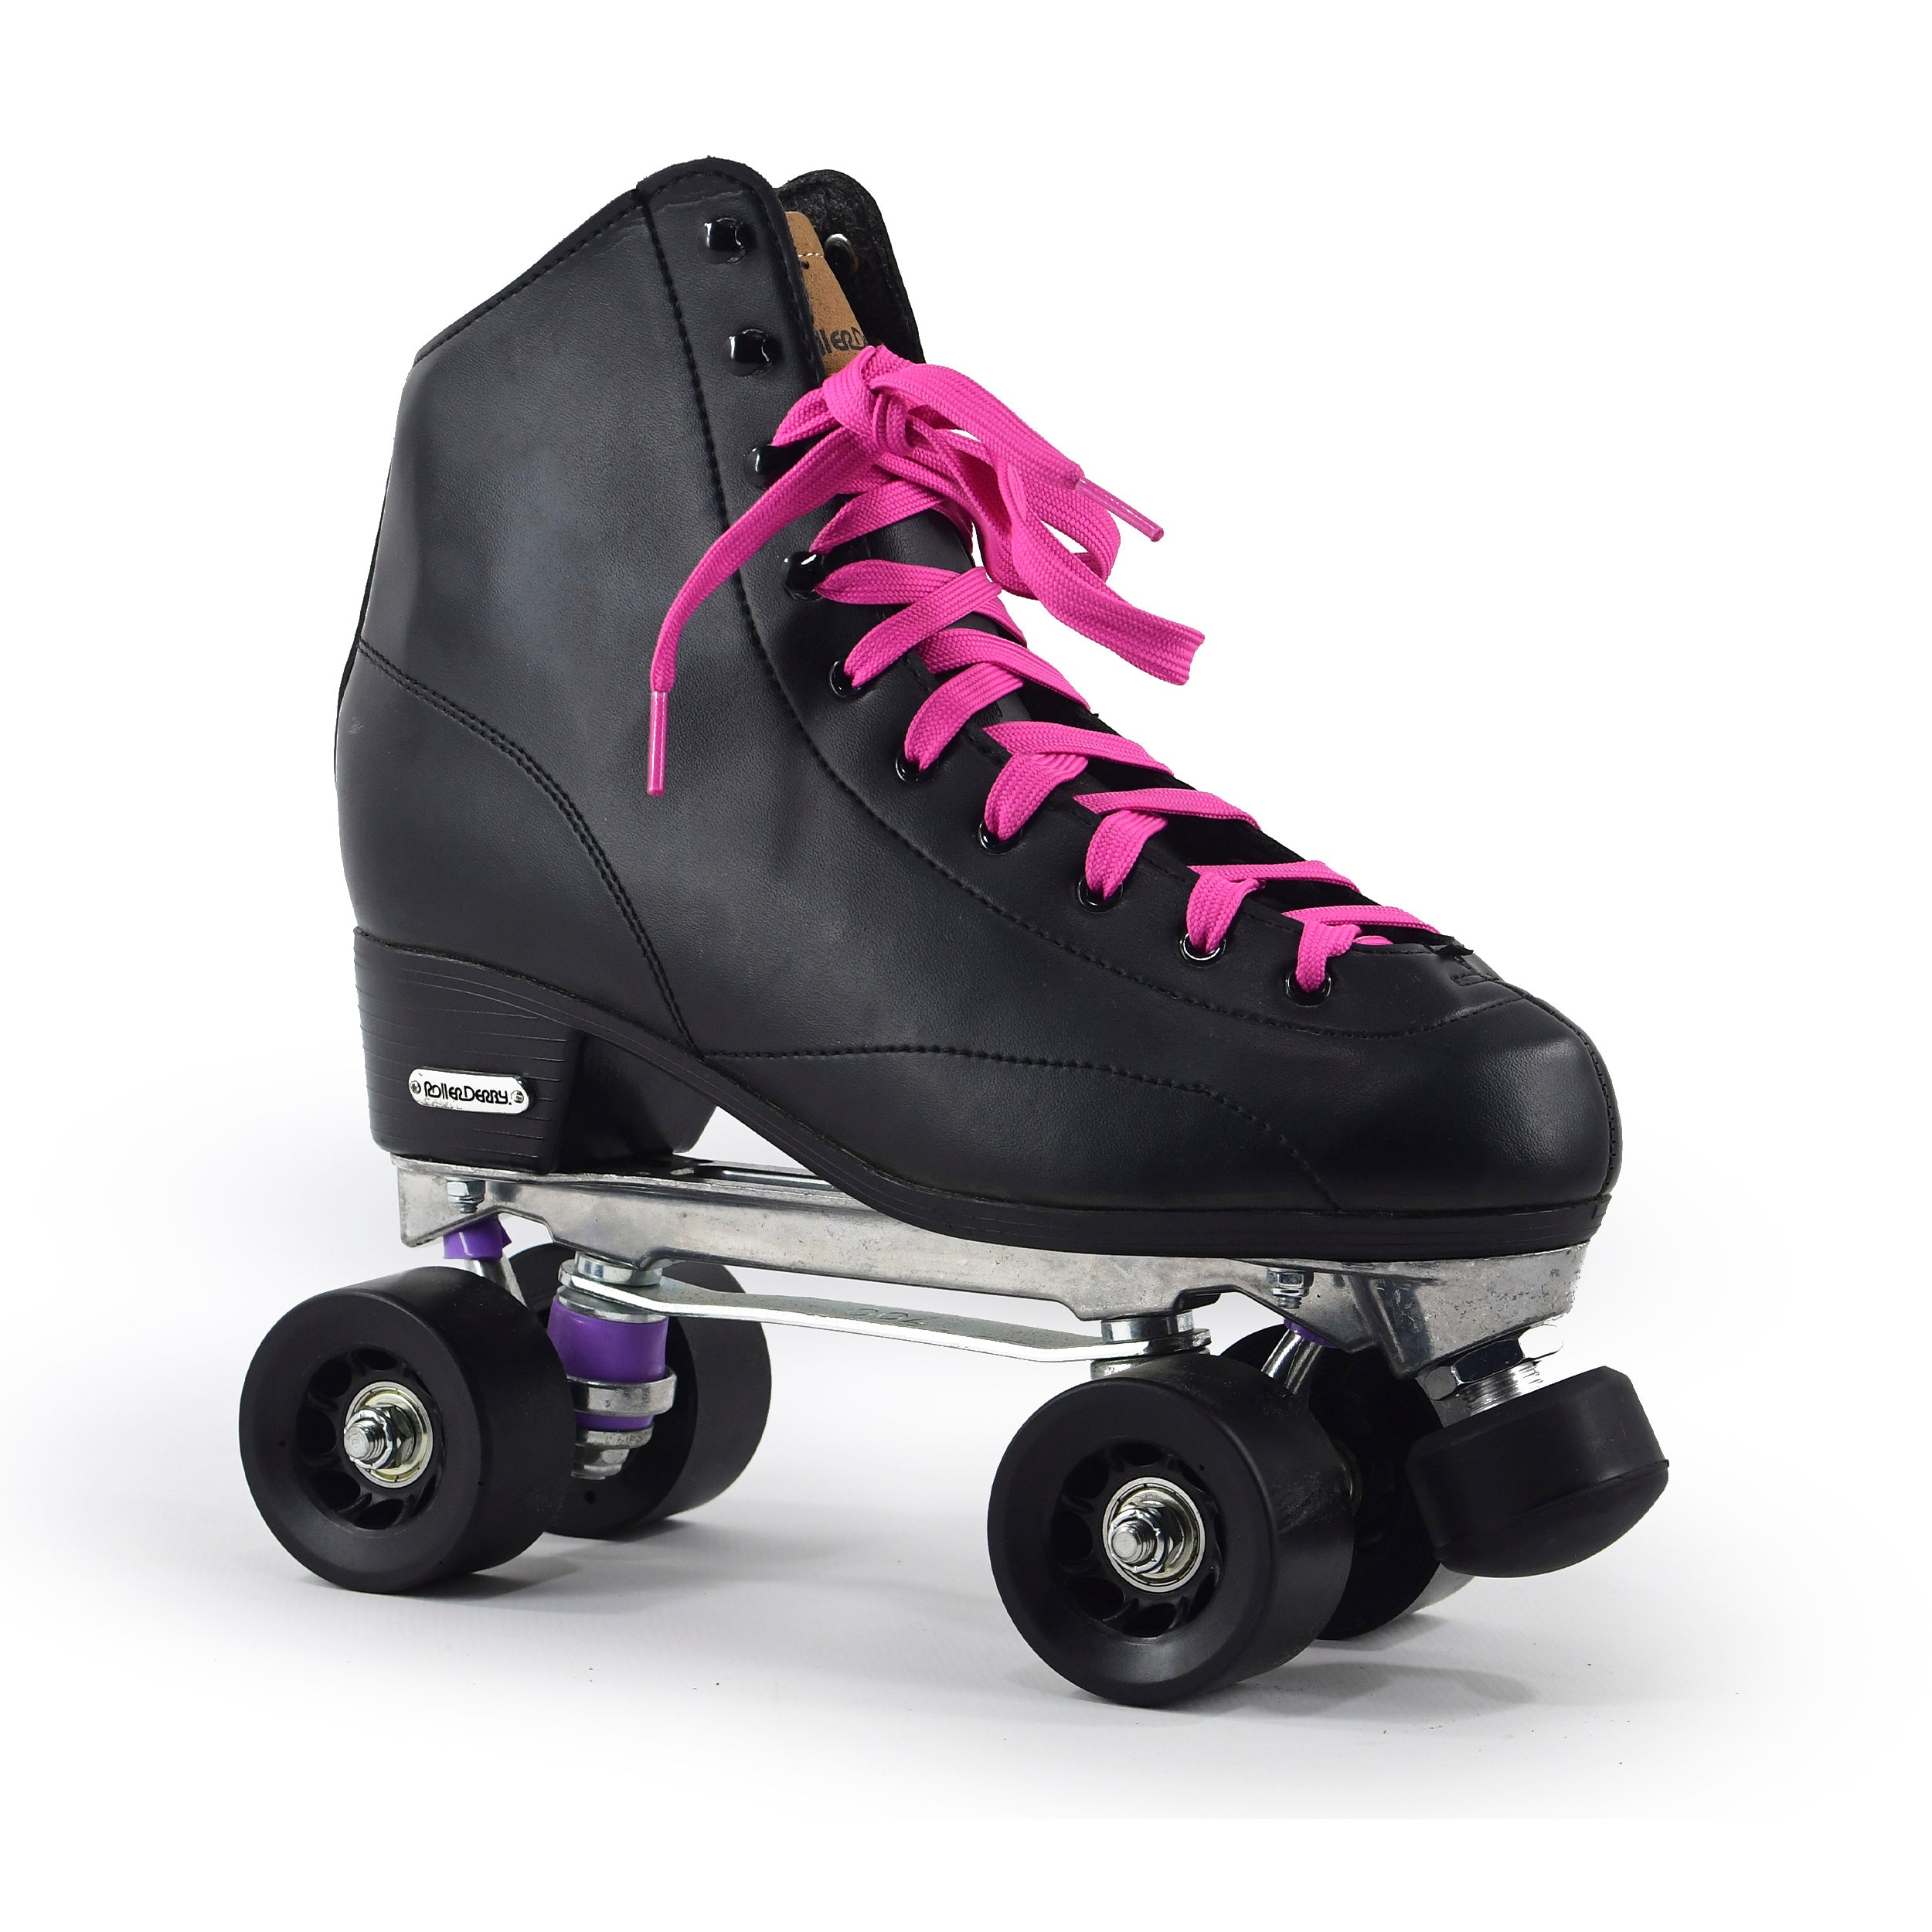 Traditional Roller Derby Black Quad Skates with Abec7 Aluminum Chassis - Size 41